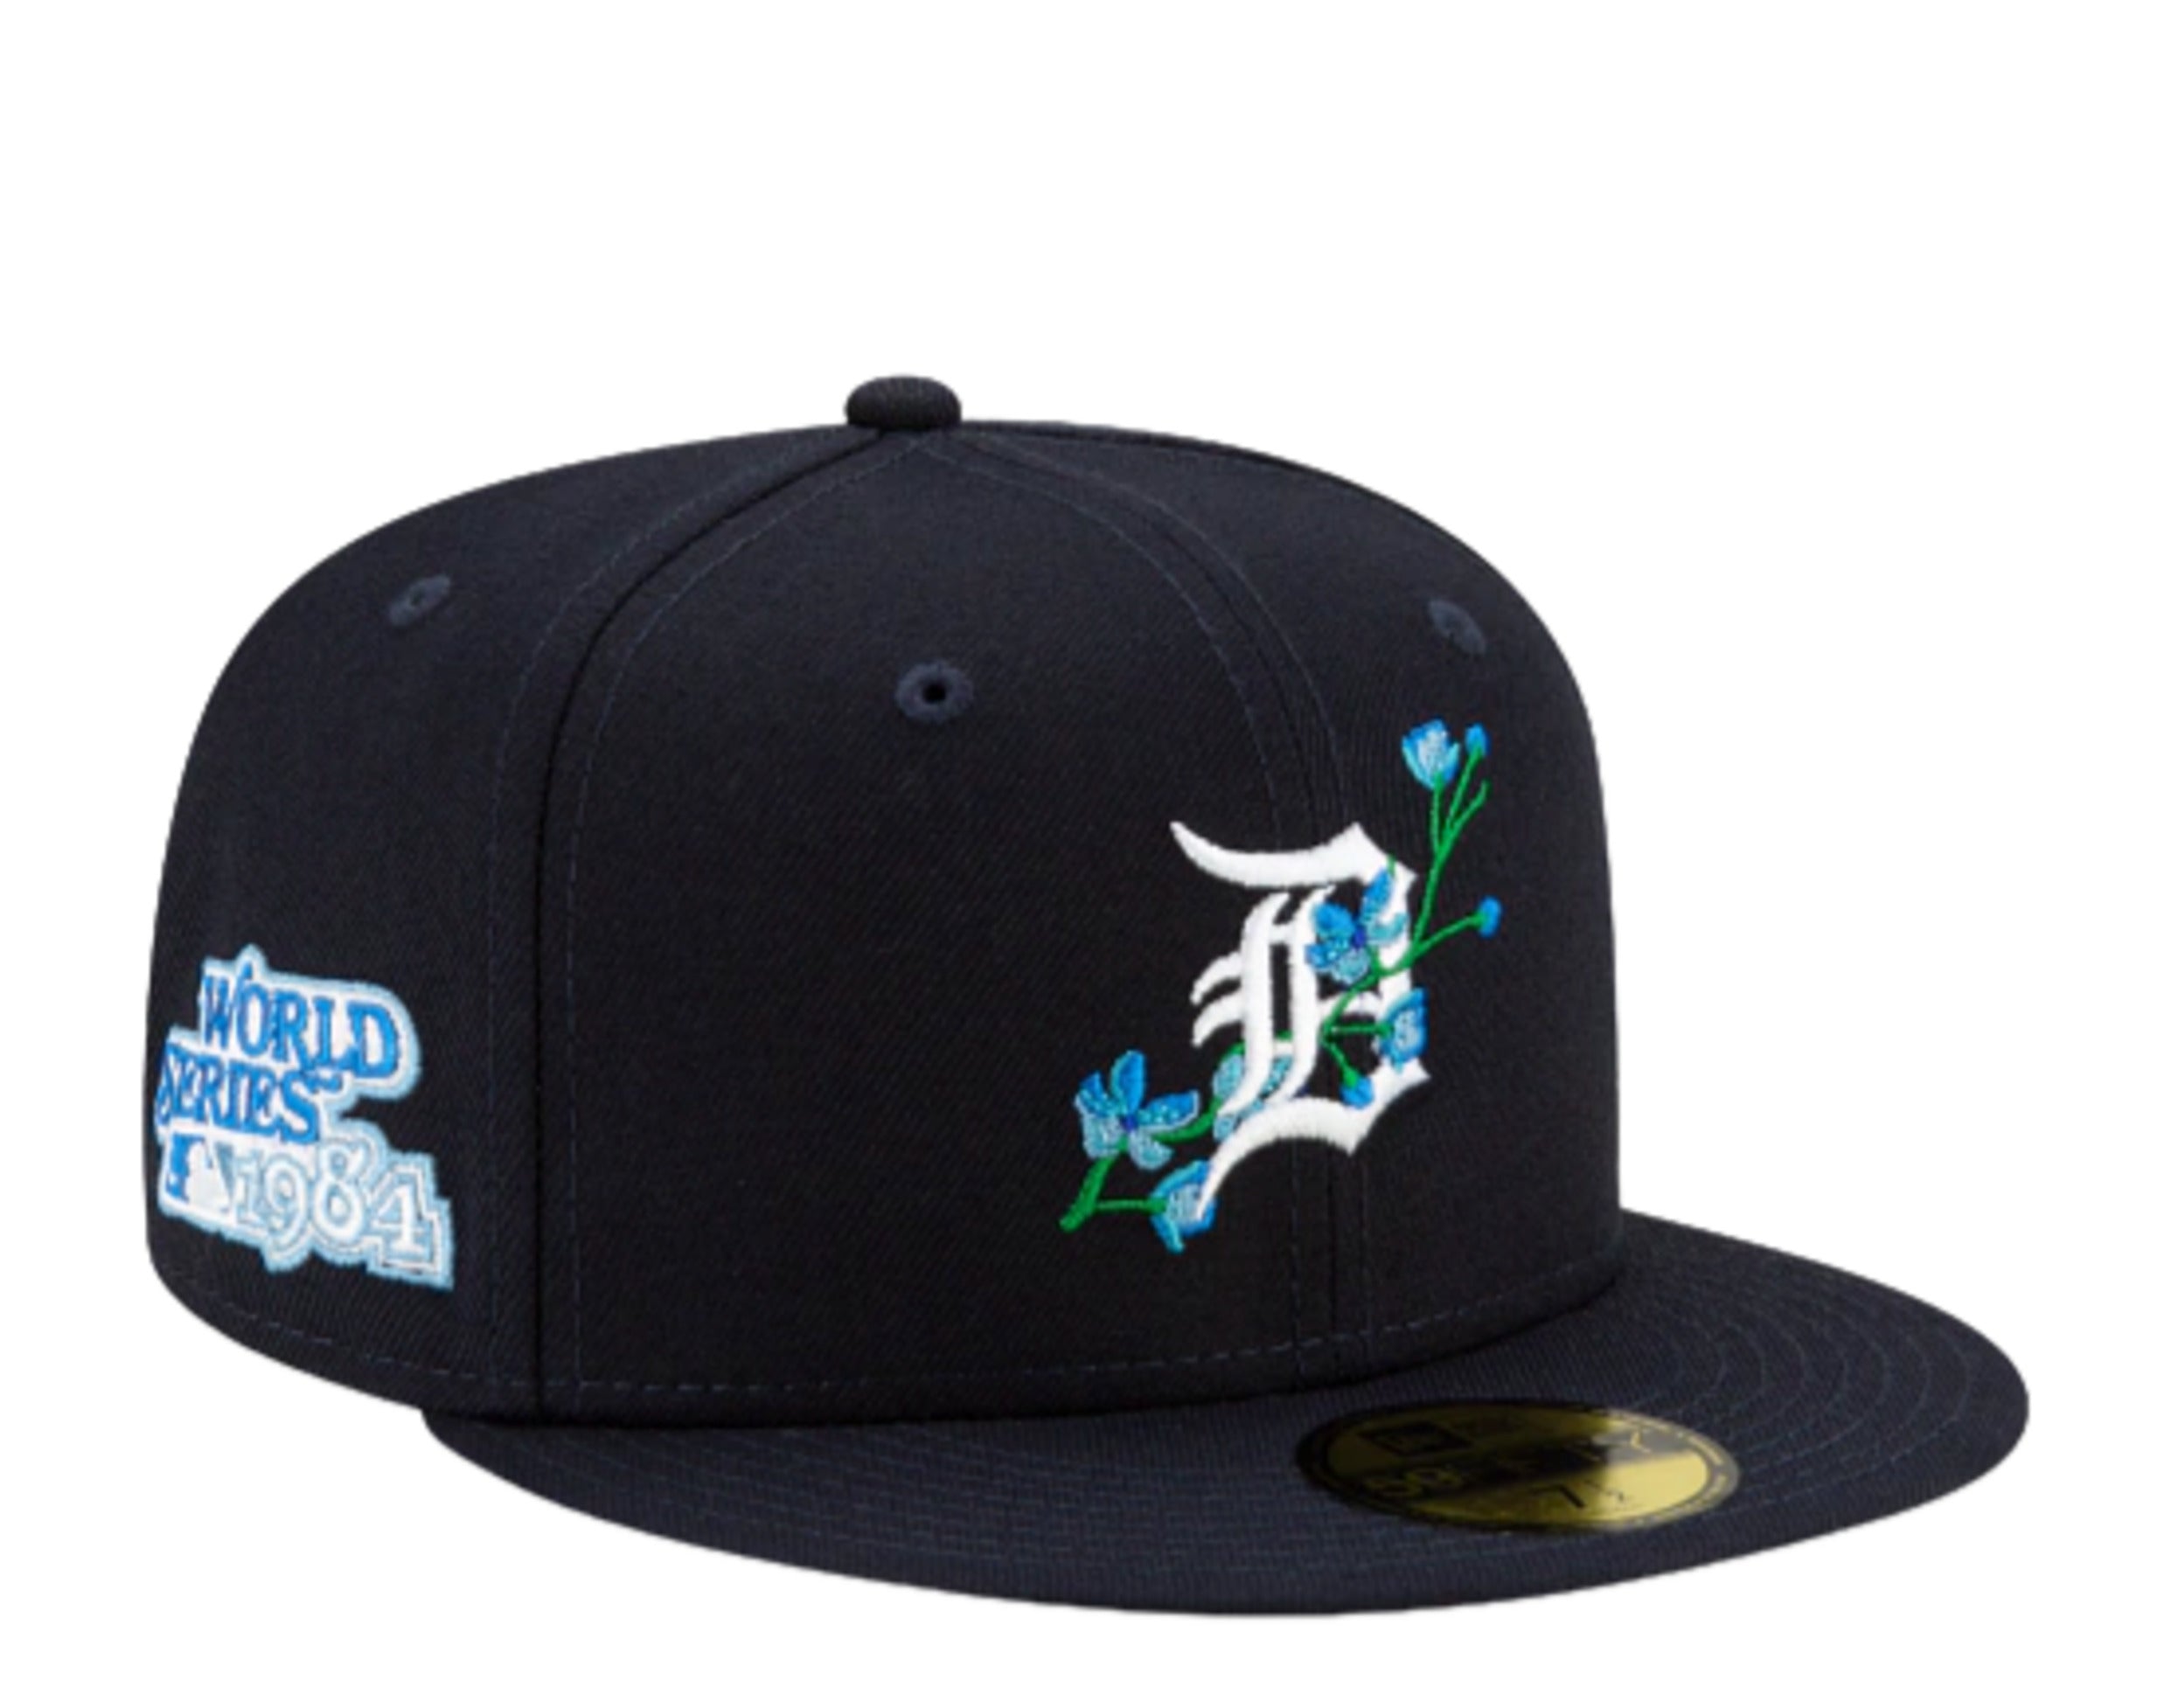 Detroit Tigers LOGO BLOOM SIDE-PATCH Navy-Sky Fitted Hat